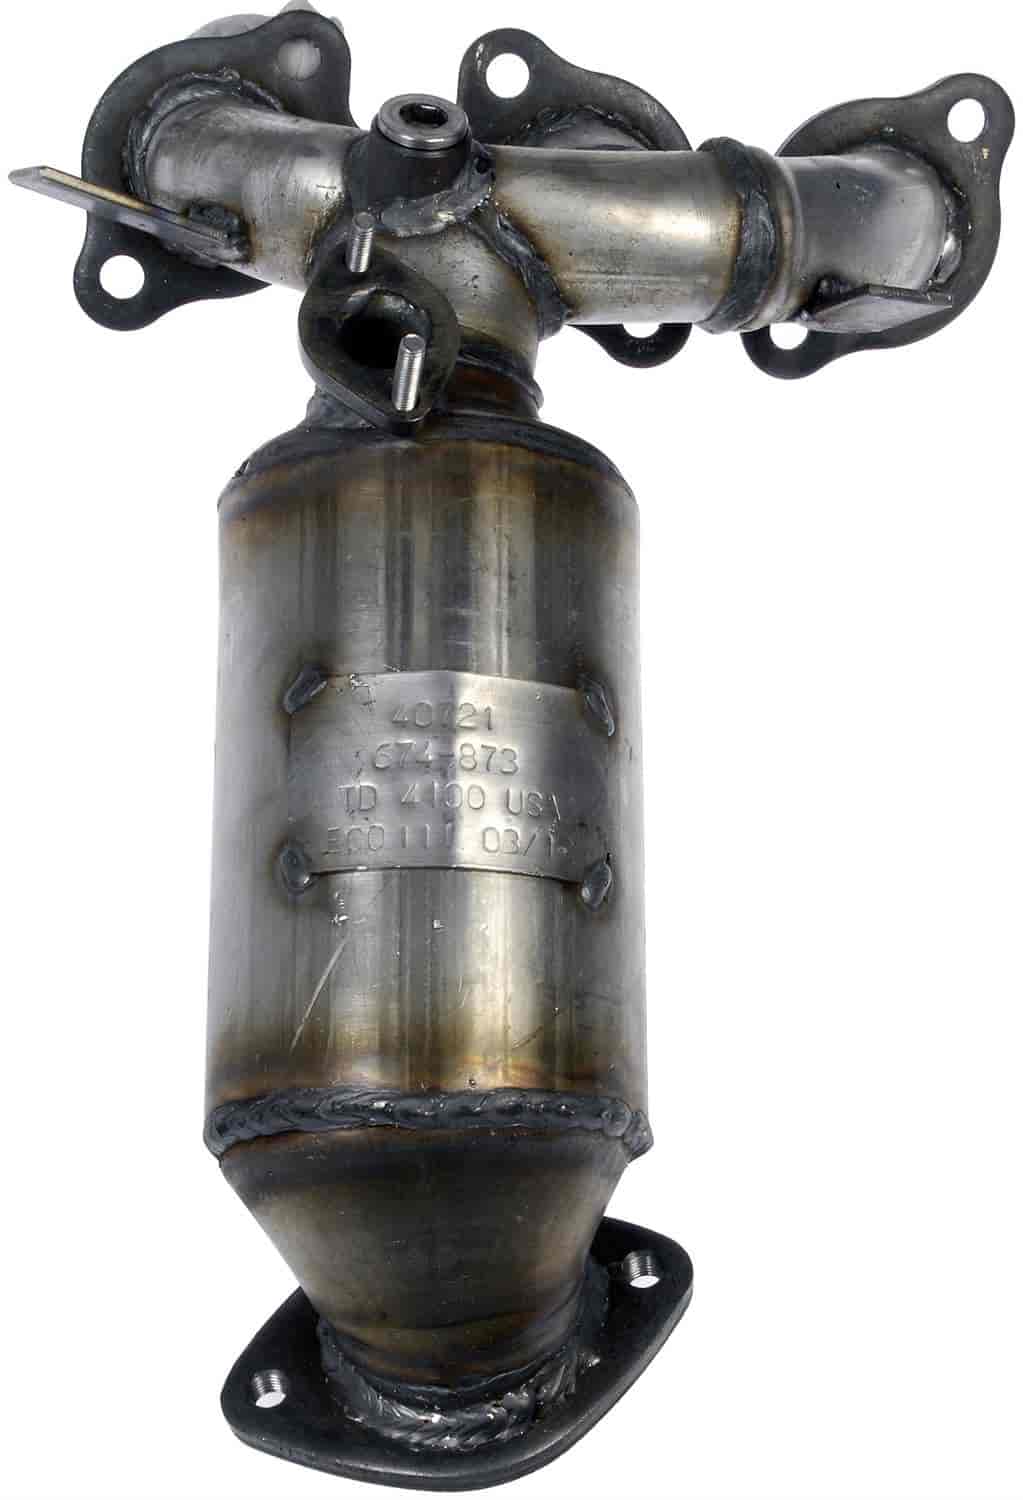 Exhaust Manifold Converter - Tubular - Includes Gaskets